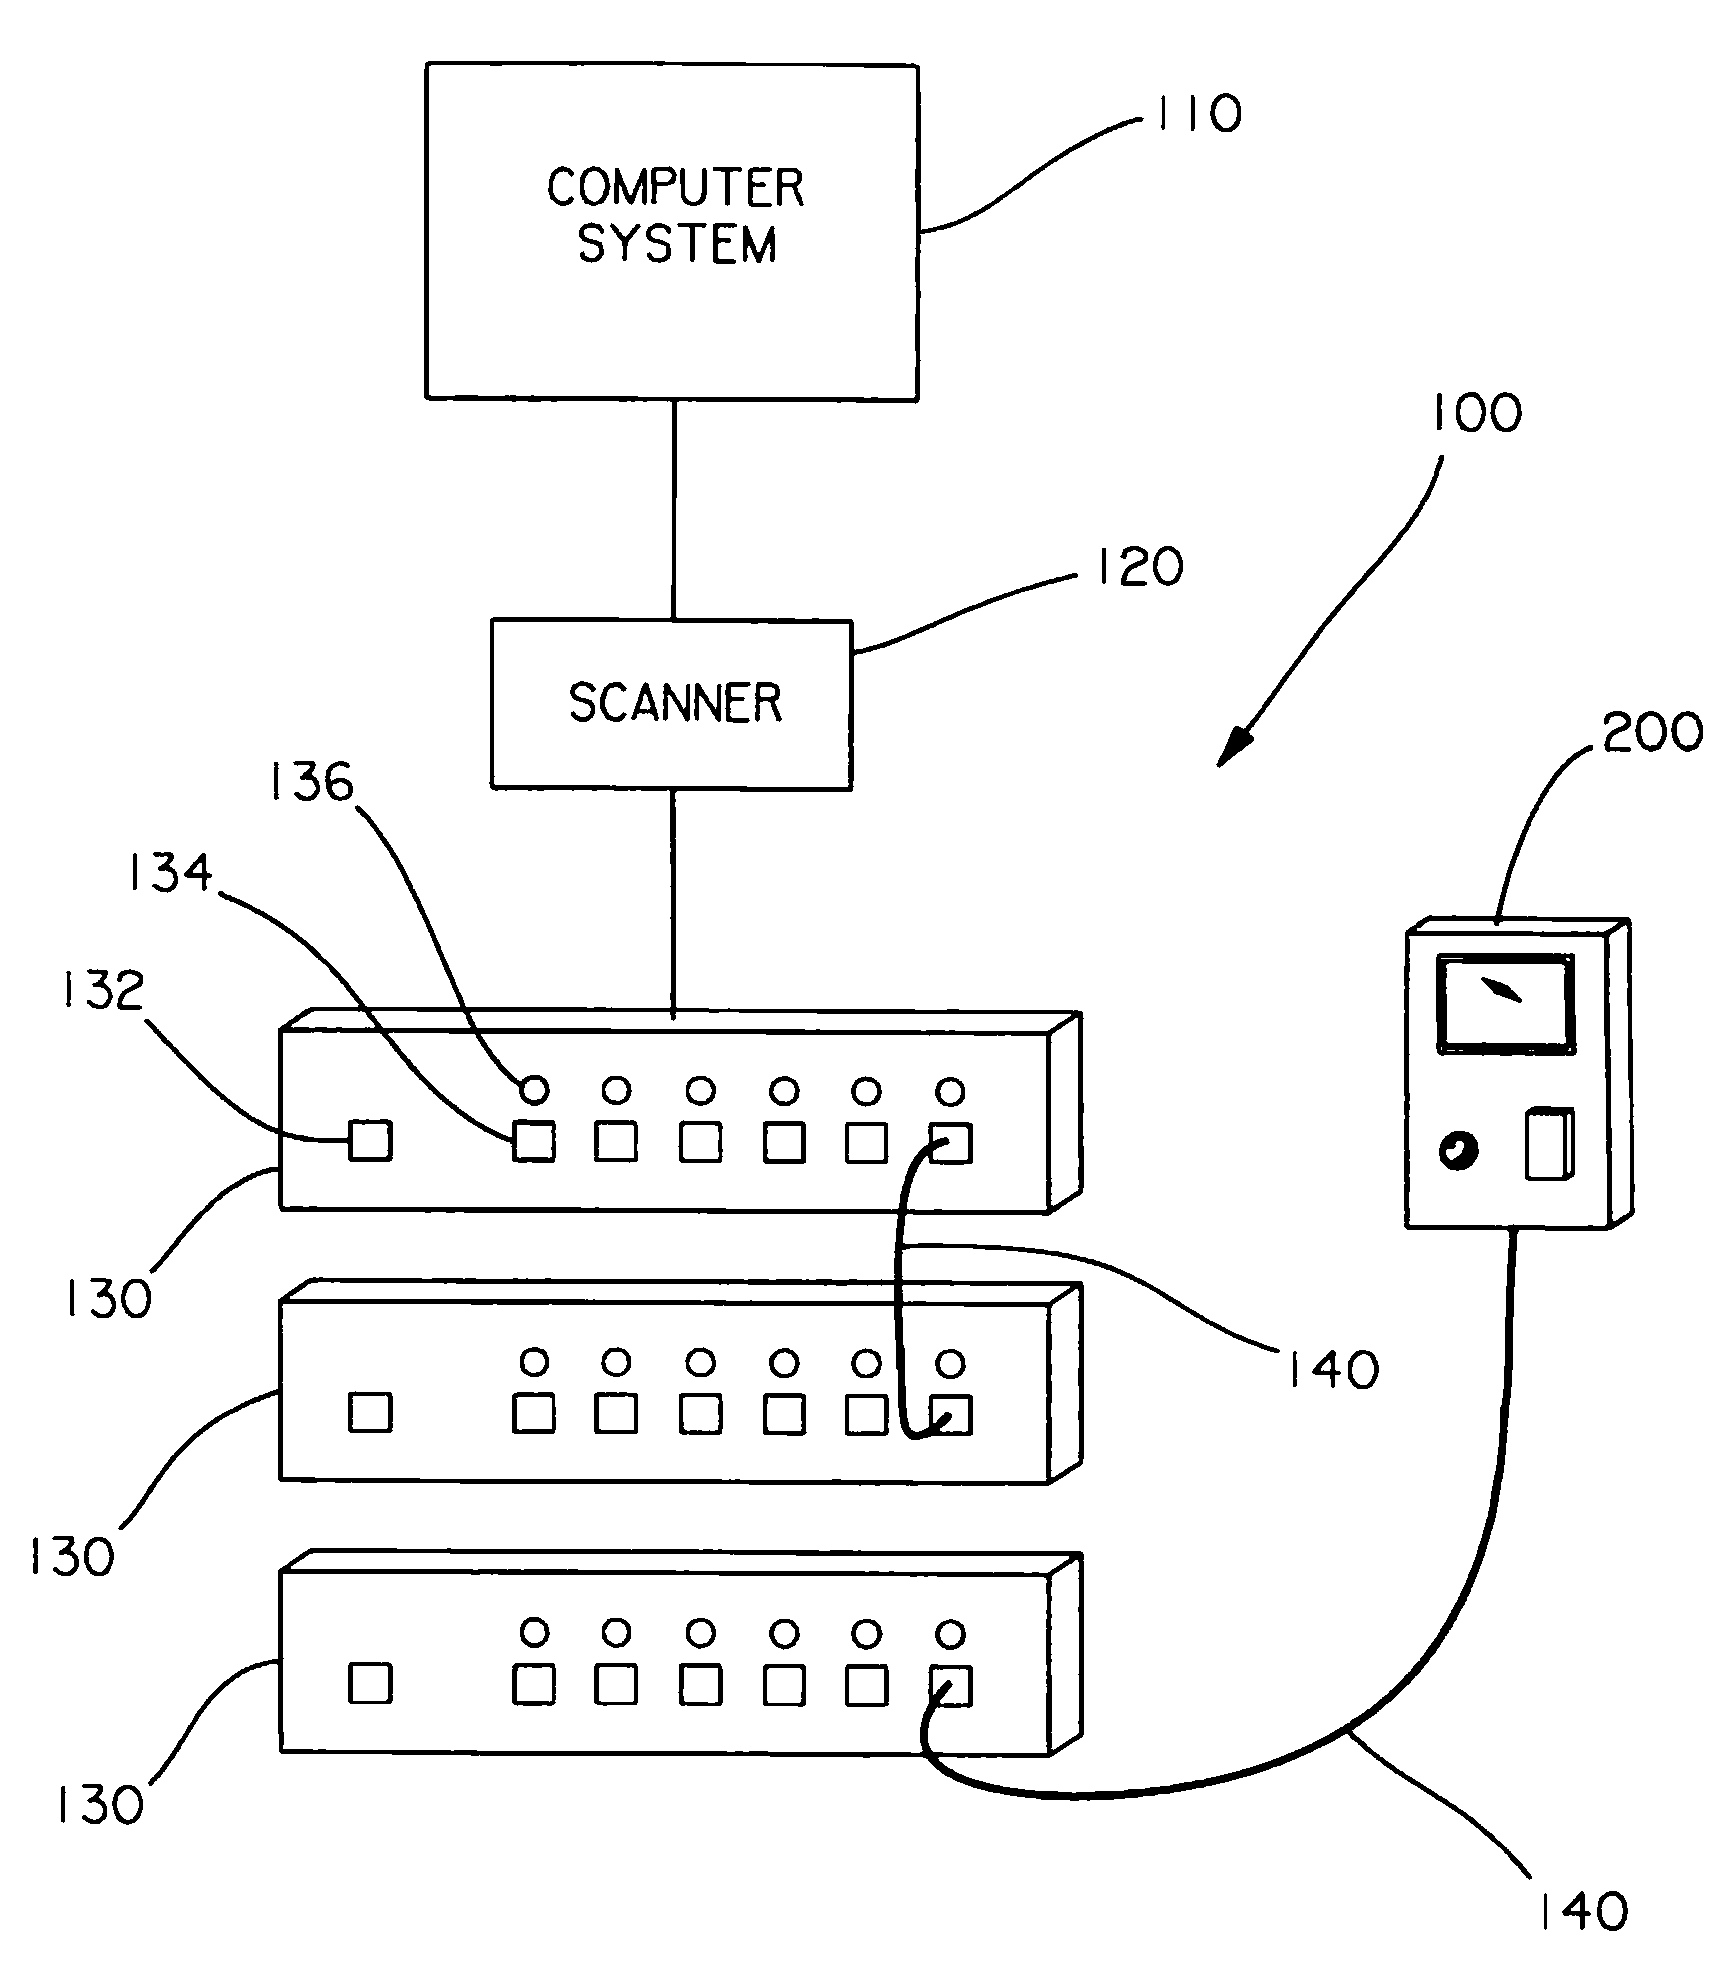 Network revision system with local system ports